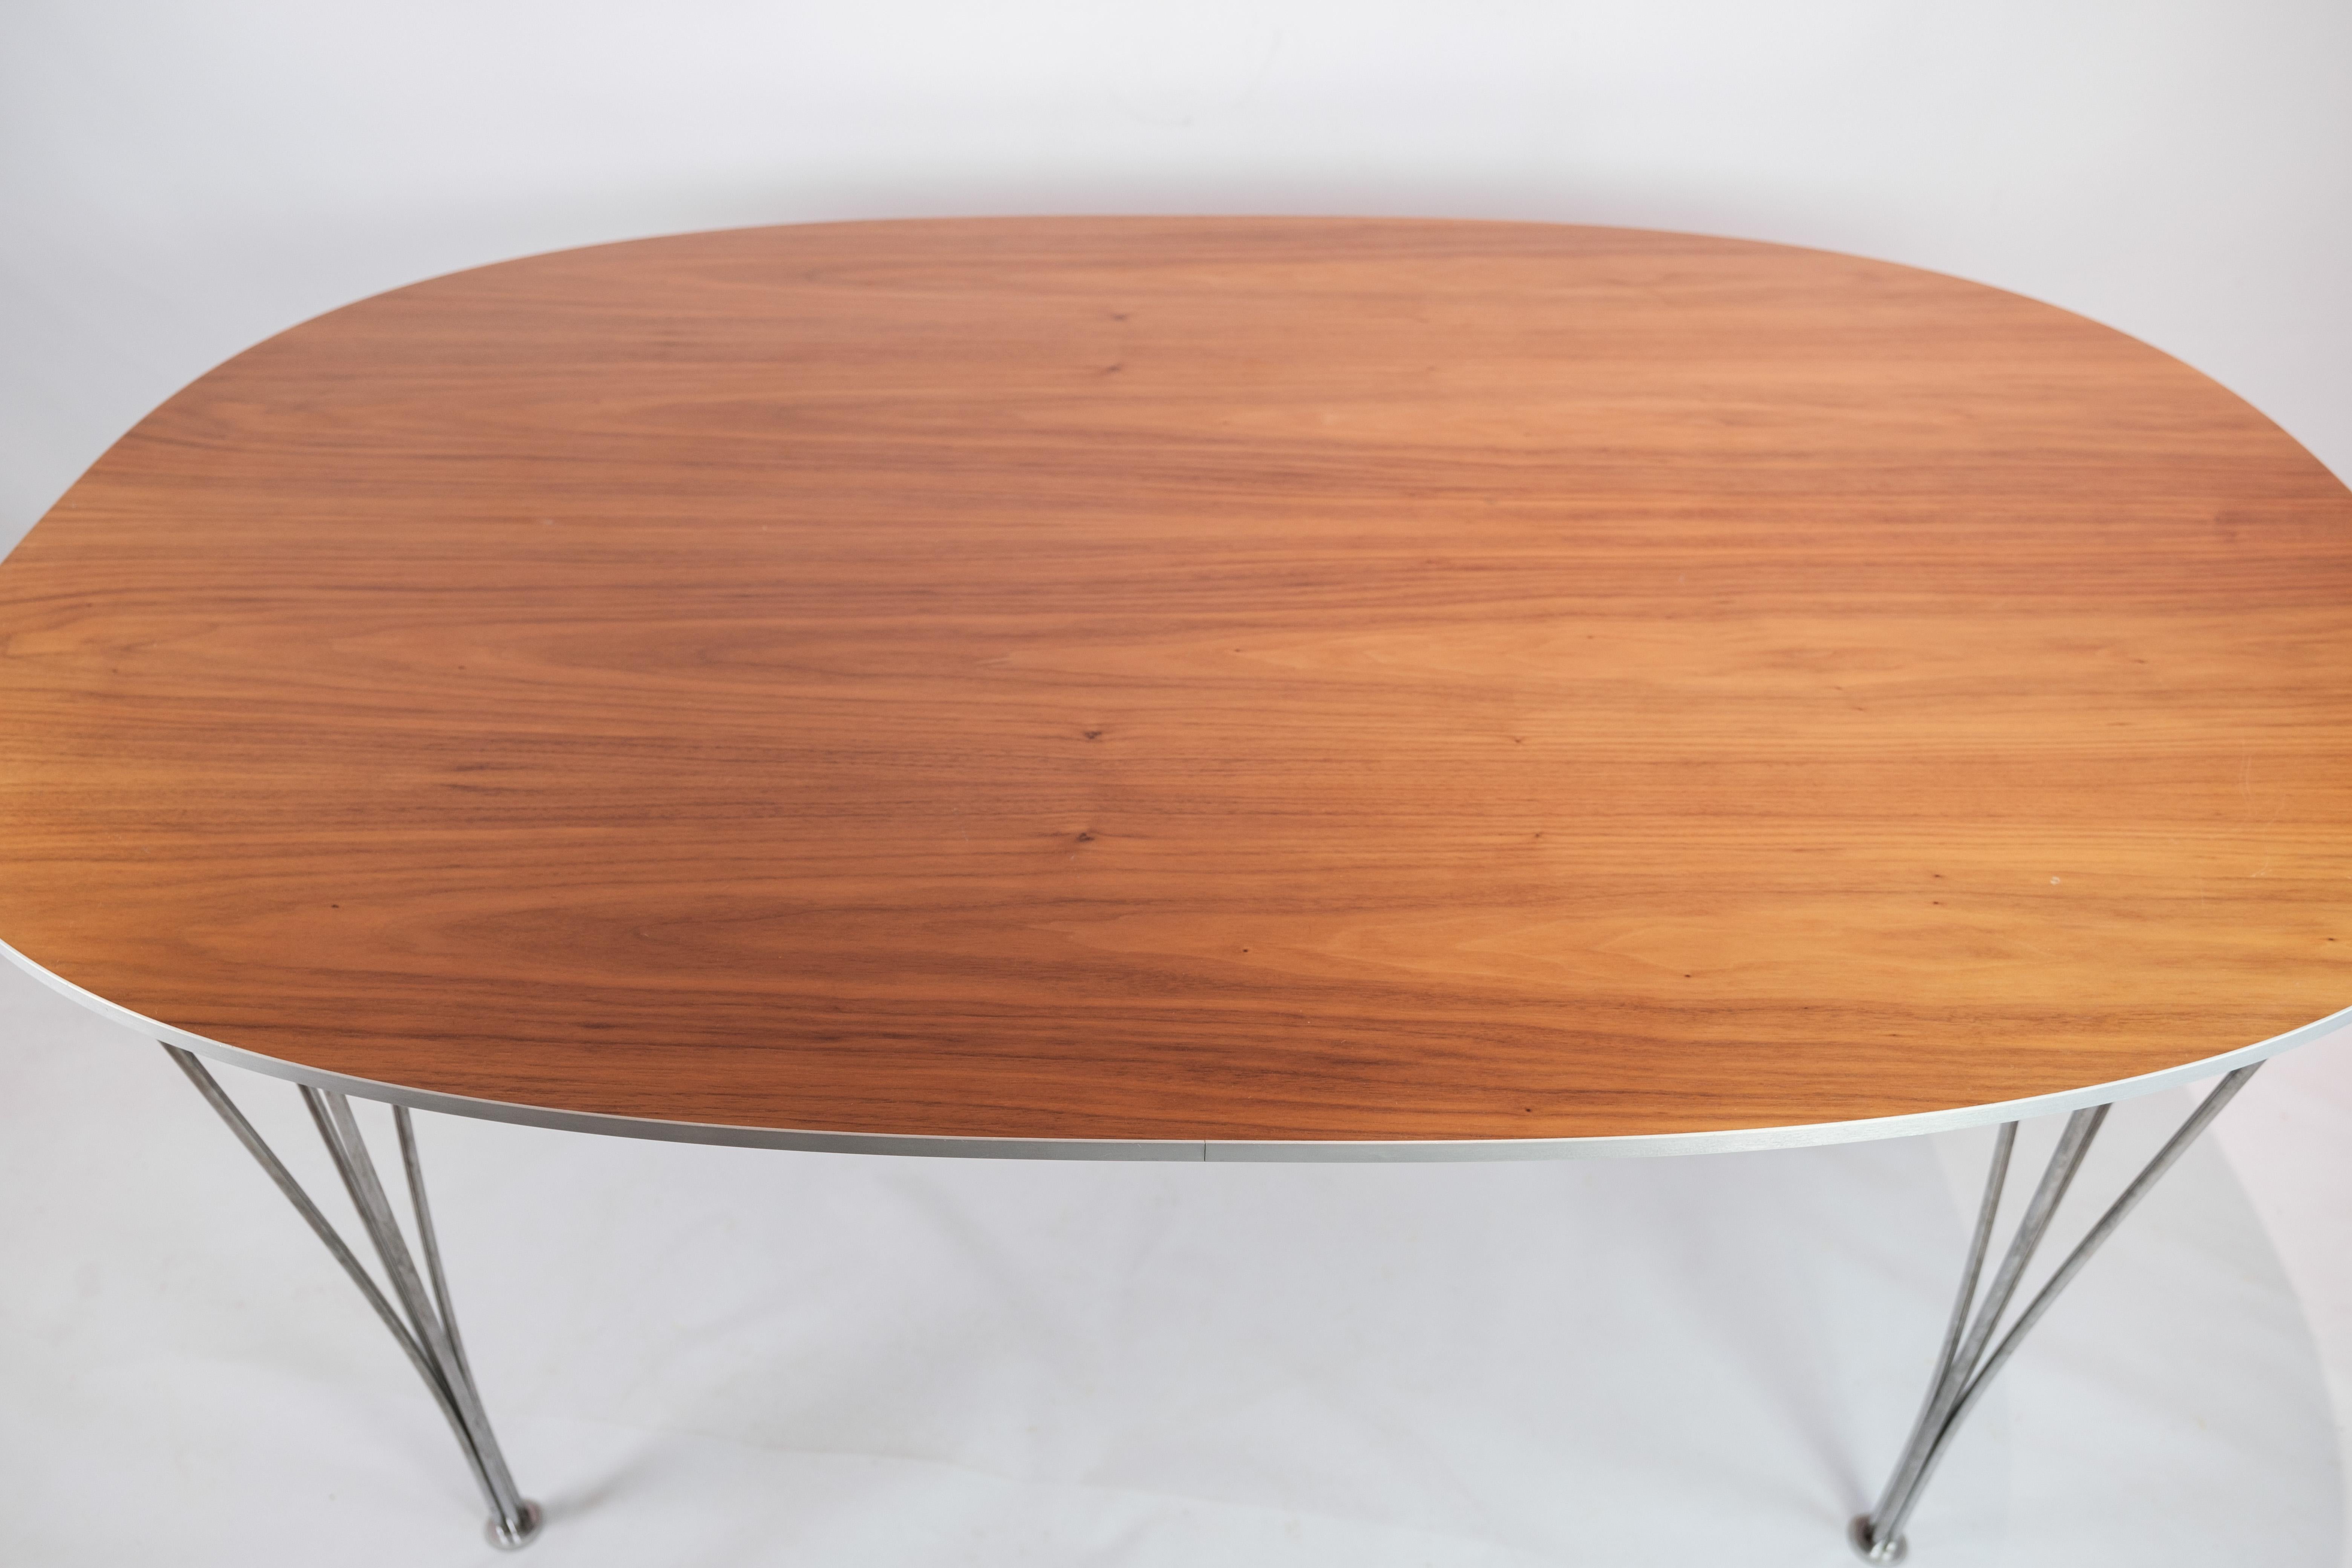 Piet Hein Table, Model B612 with Walnut Surface and Steel Legs 1